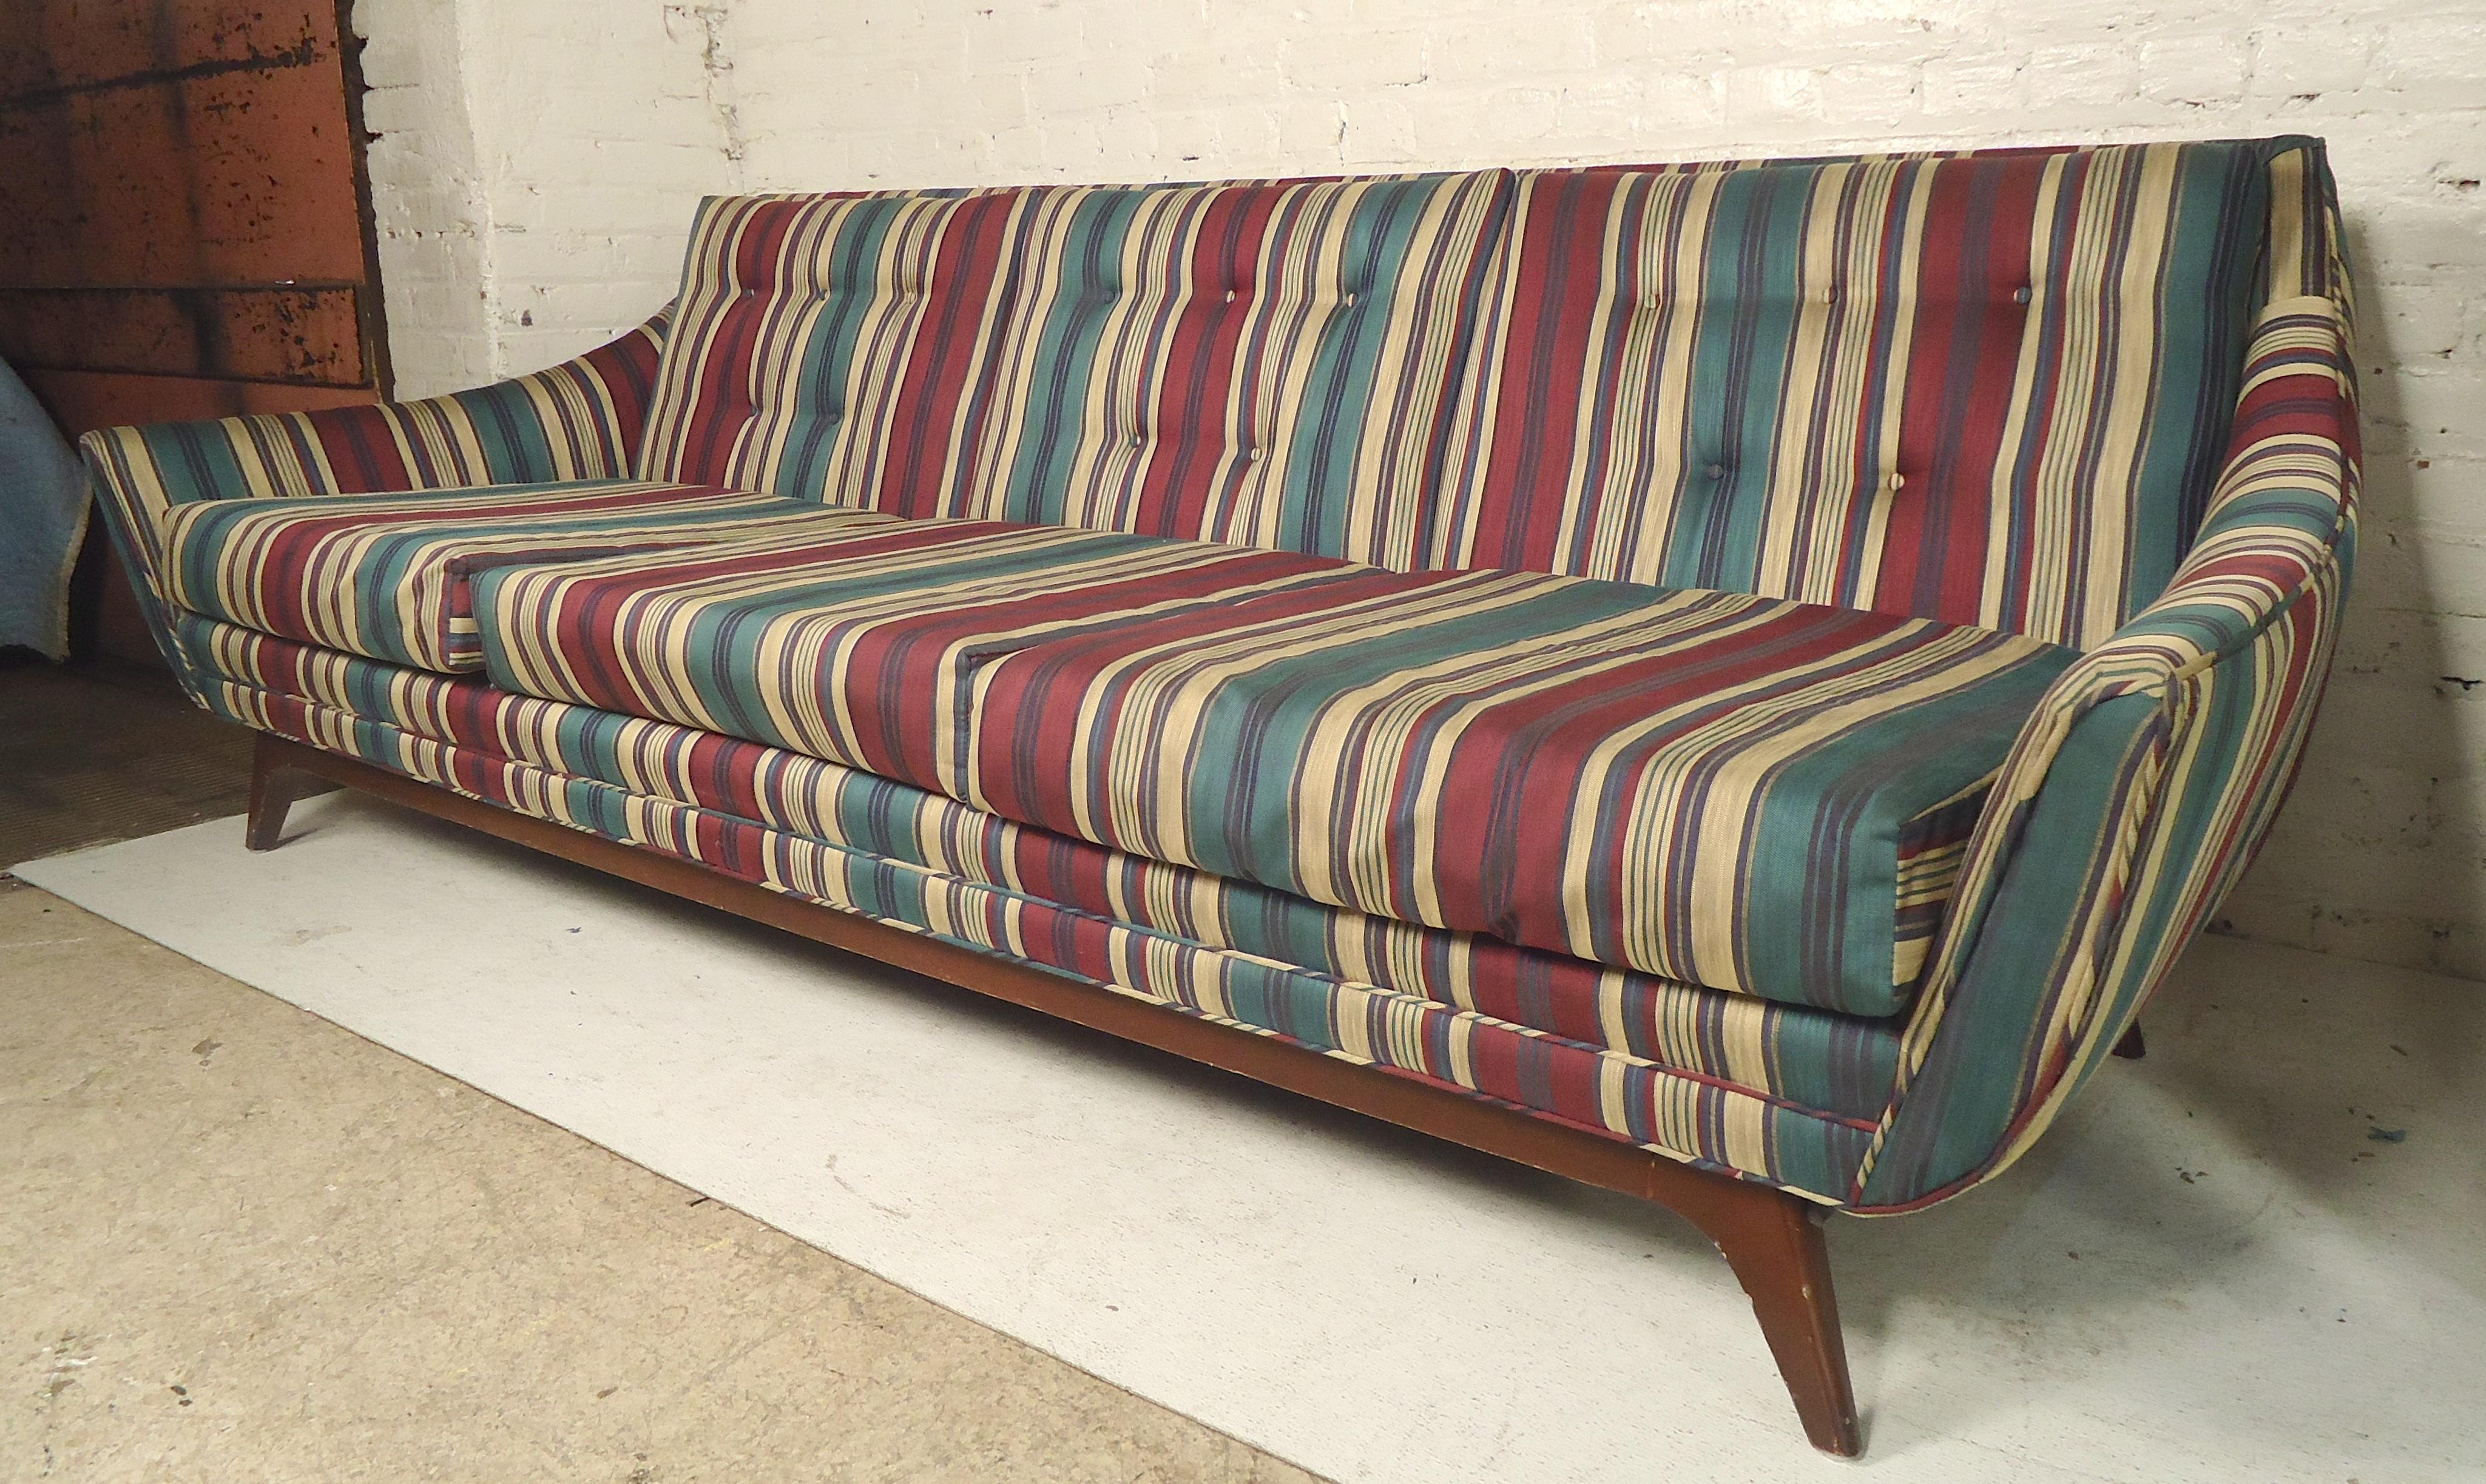 Three-seat sofa with wood legs and rounded sides. Tufted back with clean fabric.

(Please confirm item location - NY or NJ - with dealer).
   